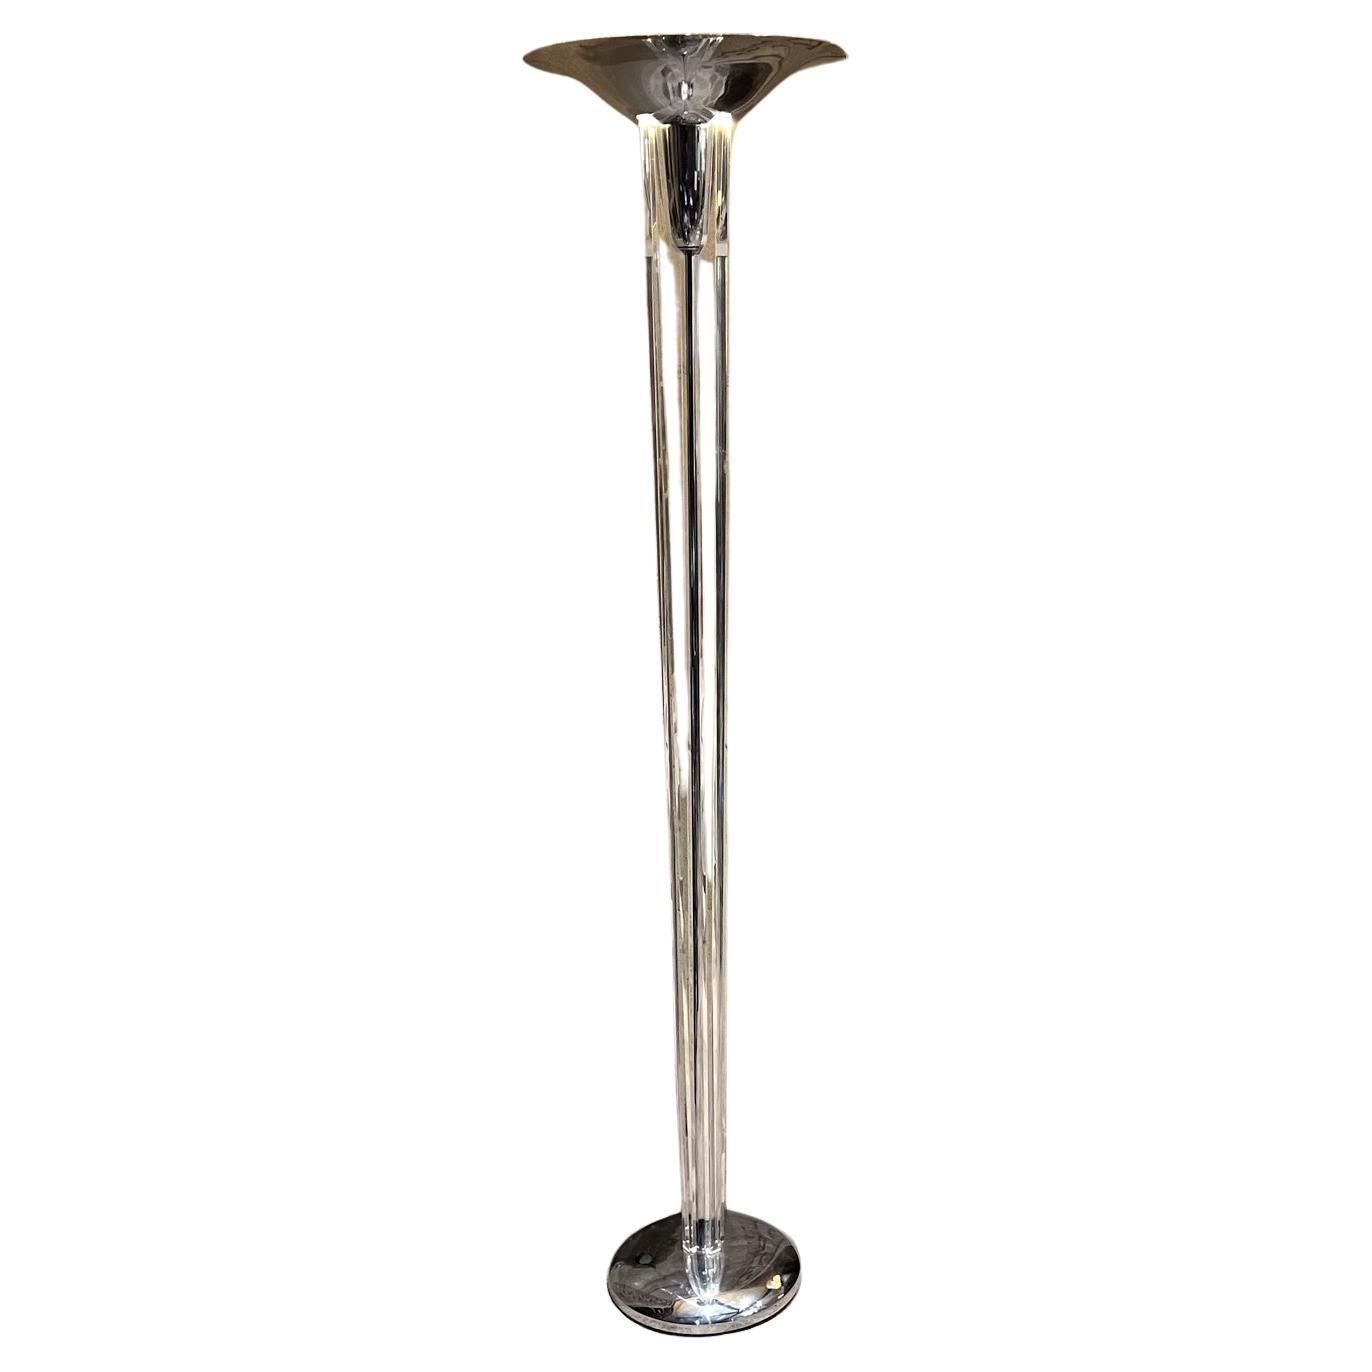 1970s Boyd Lighting Company Chrome Floor Lamp Deco Torchiere  For Sale